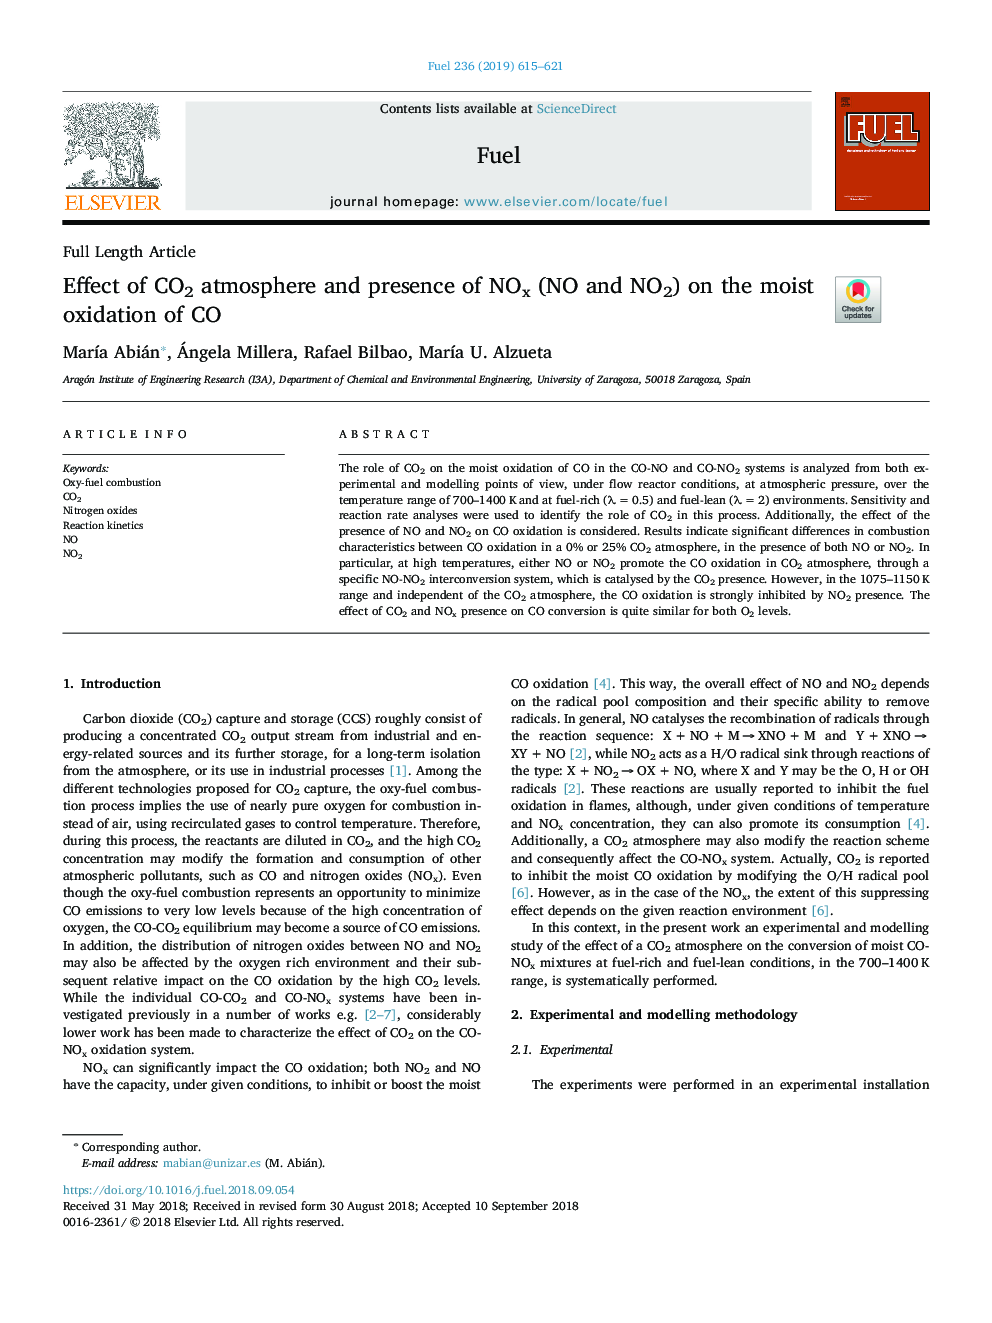 Effect of CO2 atmosphere and presence of NOx (NO and NO2) on the moist oxidation of CO